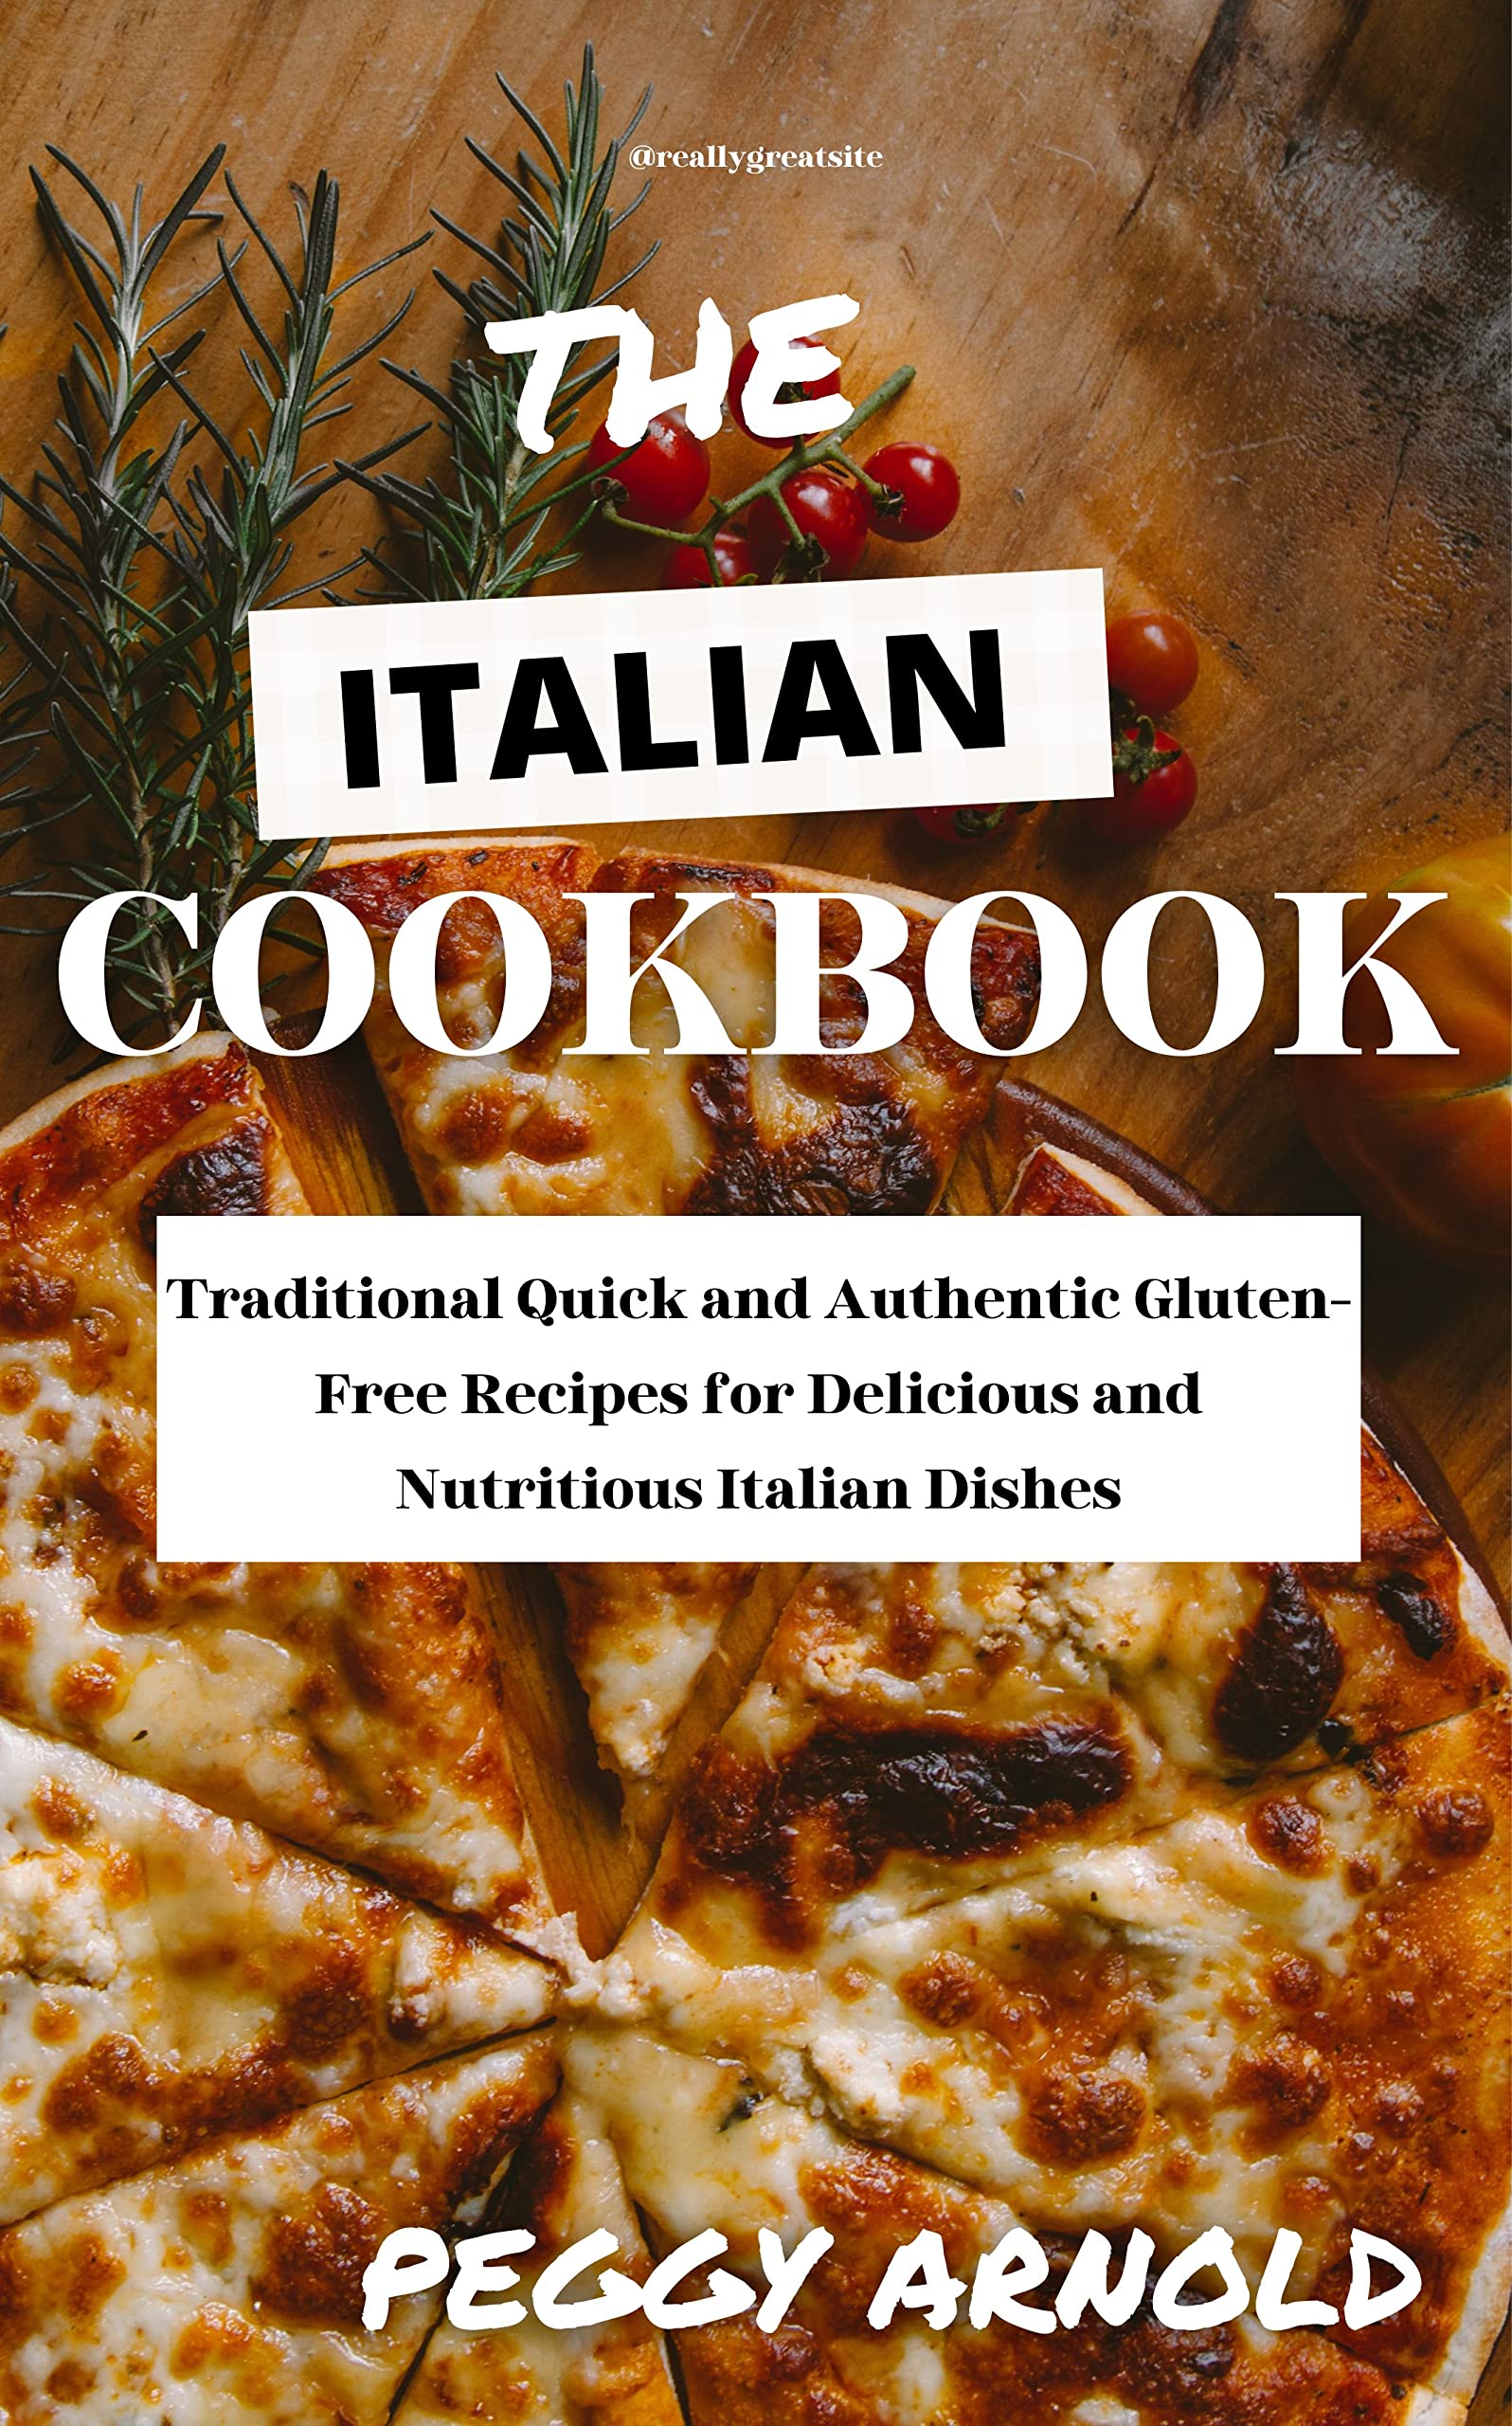 THE ITALIAN COOKBOOK: Traditional Quick and Authentic Gluten-Free Recipes for Delicious and Nutritious Italian Dishes